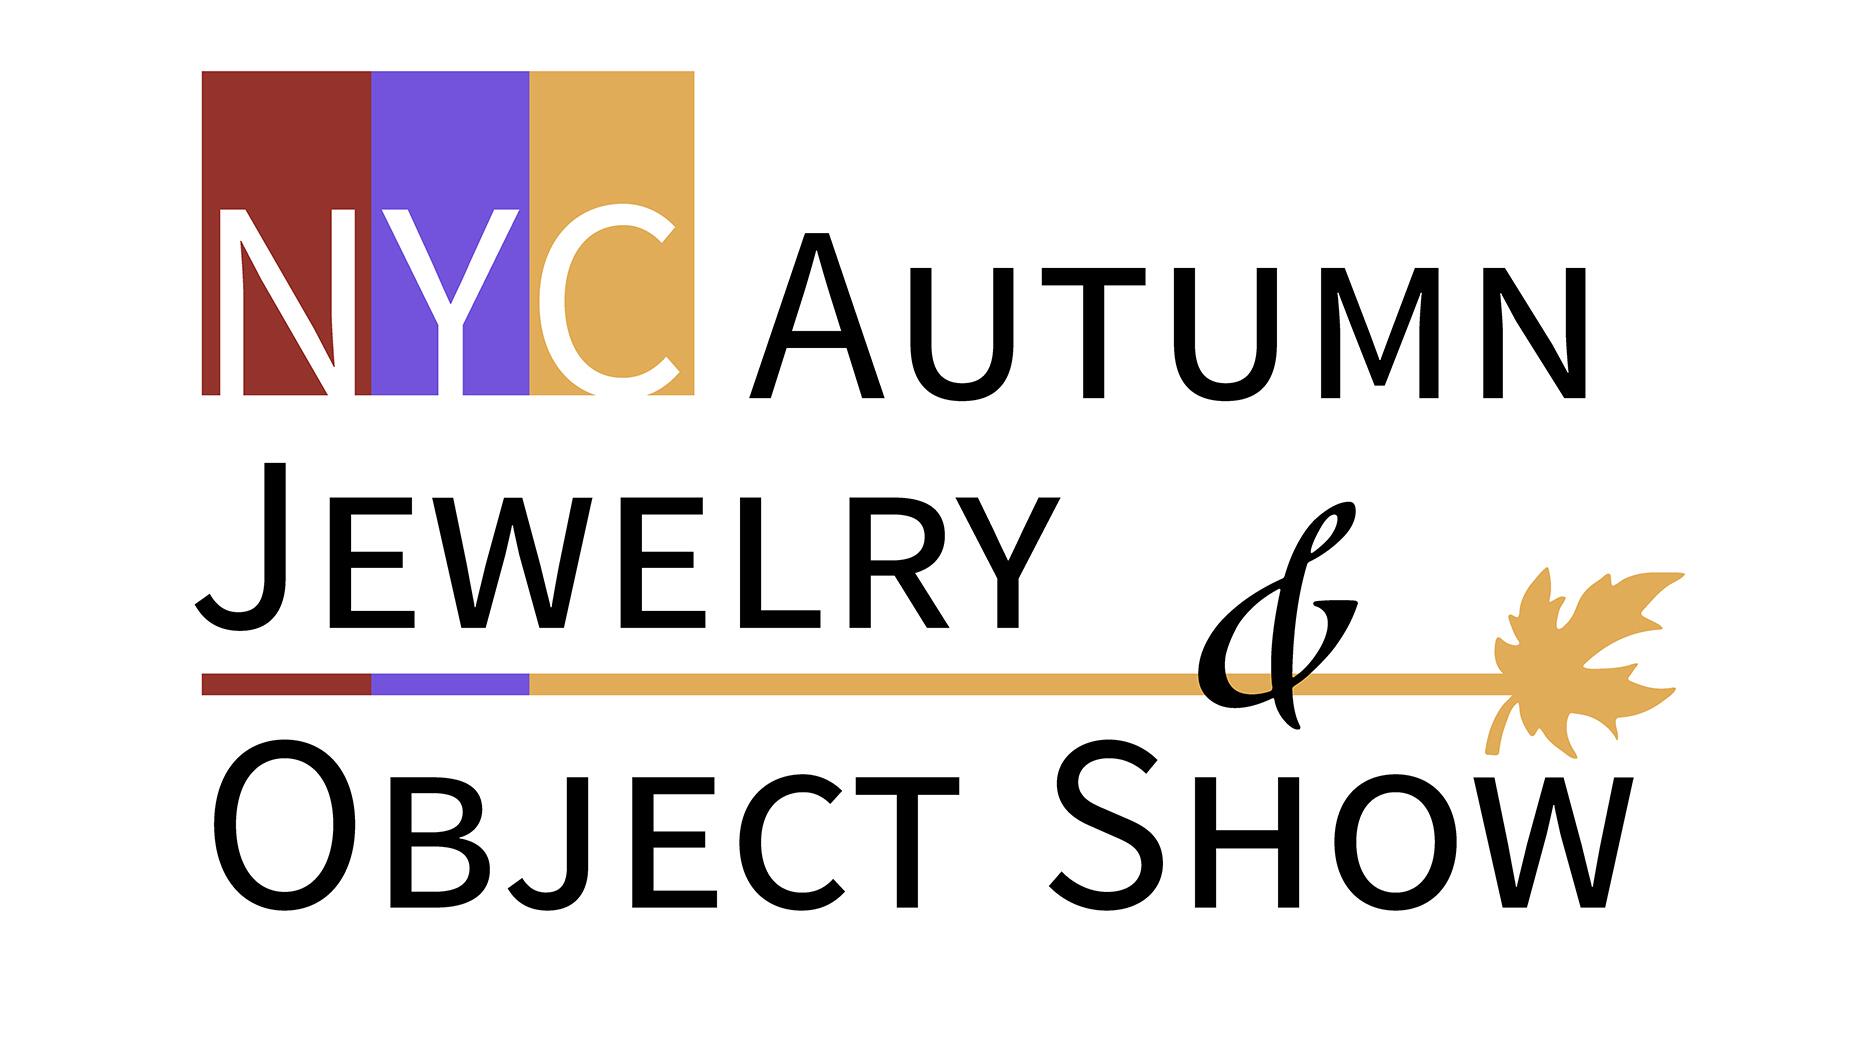 NYC Autumn Jewelry and Object Show logo